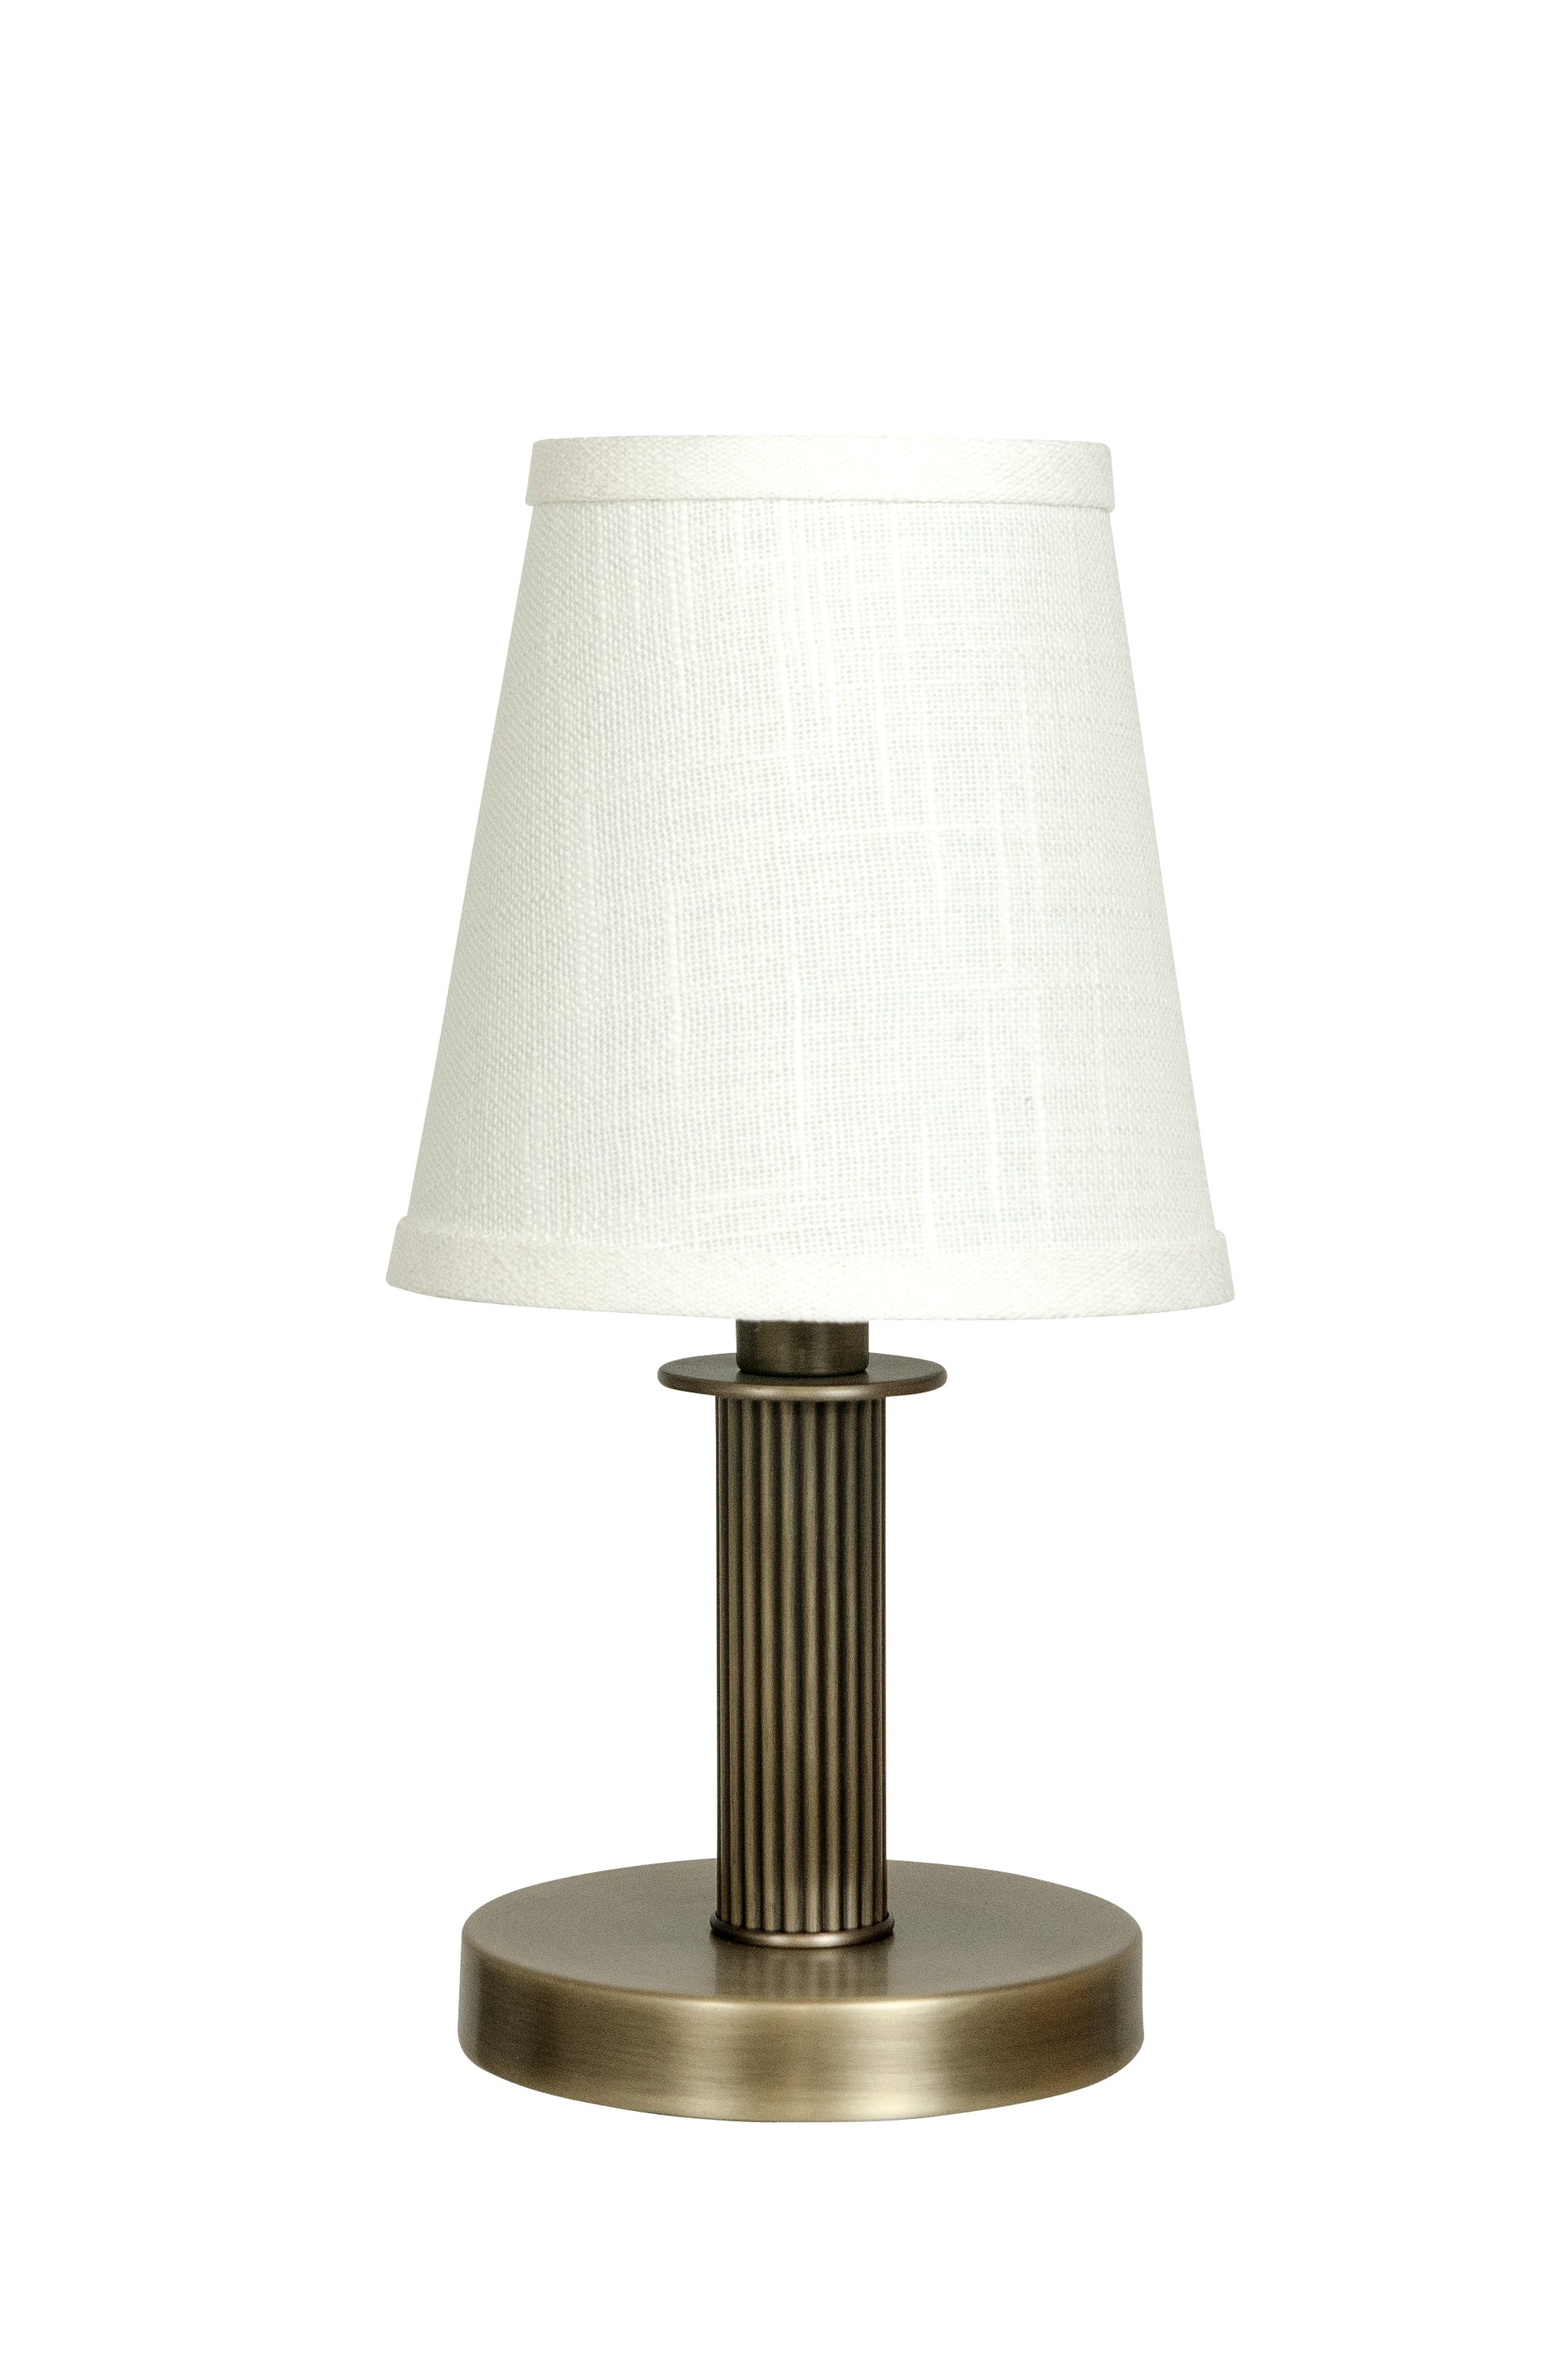 House of Troy Bryson Mini reeded column antique brass accent lamp B202-AB